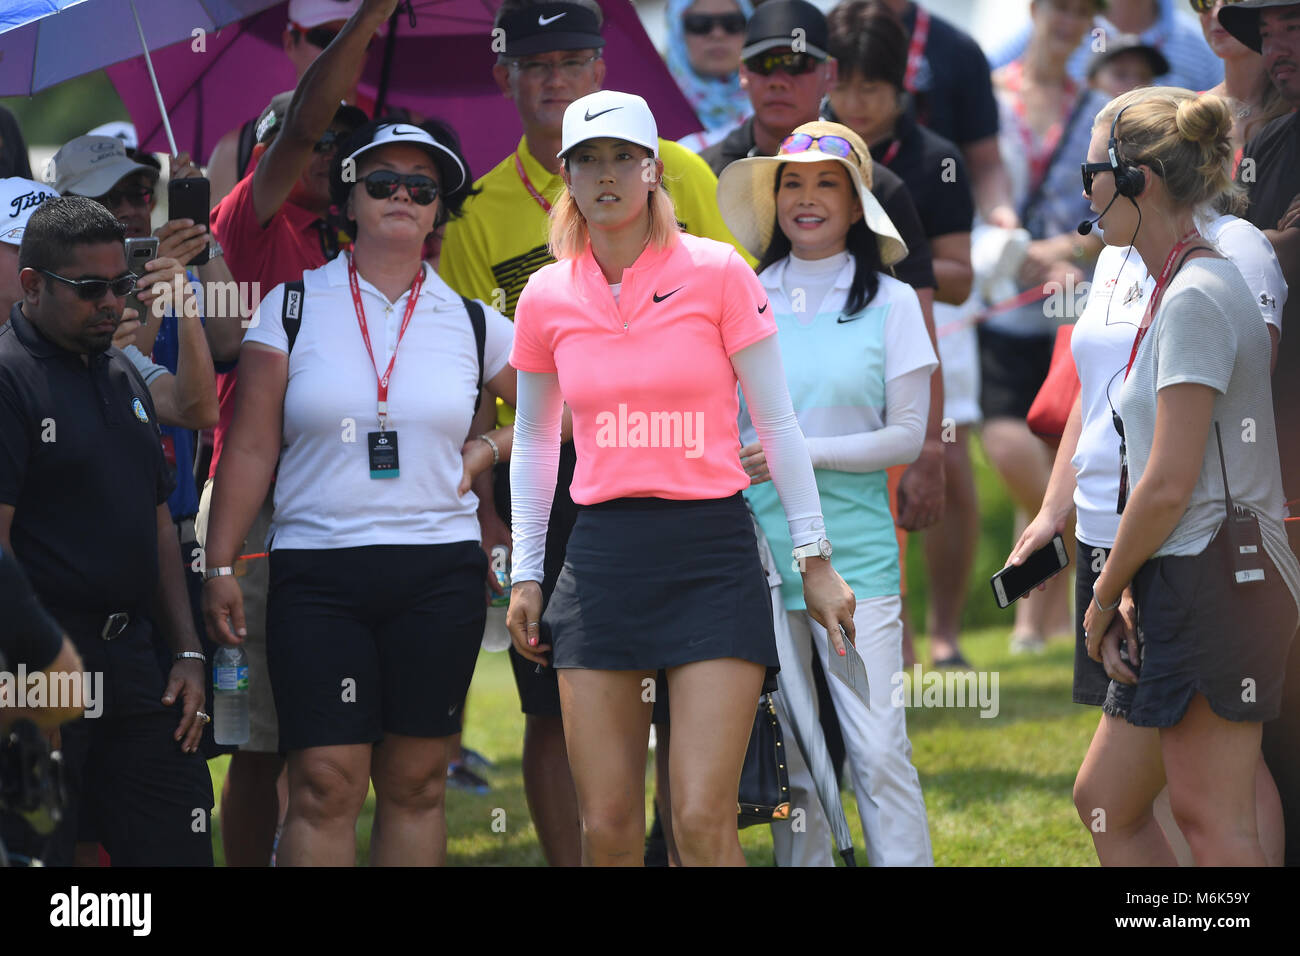 Singapore. 4th Mar, 2018. Michelle Wie (USA), MAR 04, 2018 - Golf: Michelle Wie before the winning celemony on the 18th hole during the round 4 of HSBC Women's World Championship 2018, at the Sentosa Golf Club in Singapore on March 4, 2018. Credit: Haruhiko Otsuka/AFLO/Alamy Live News Stock Photo